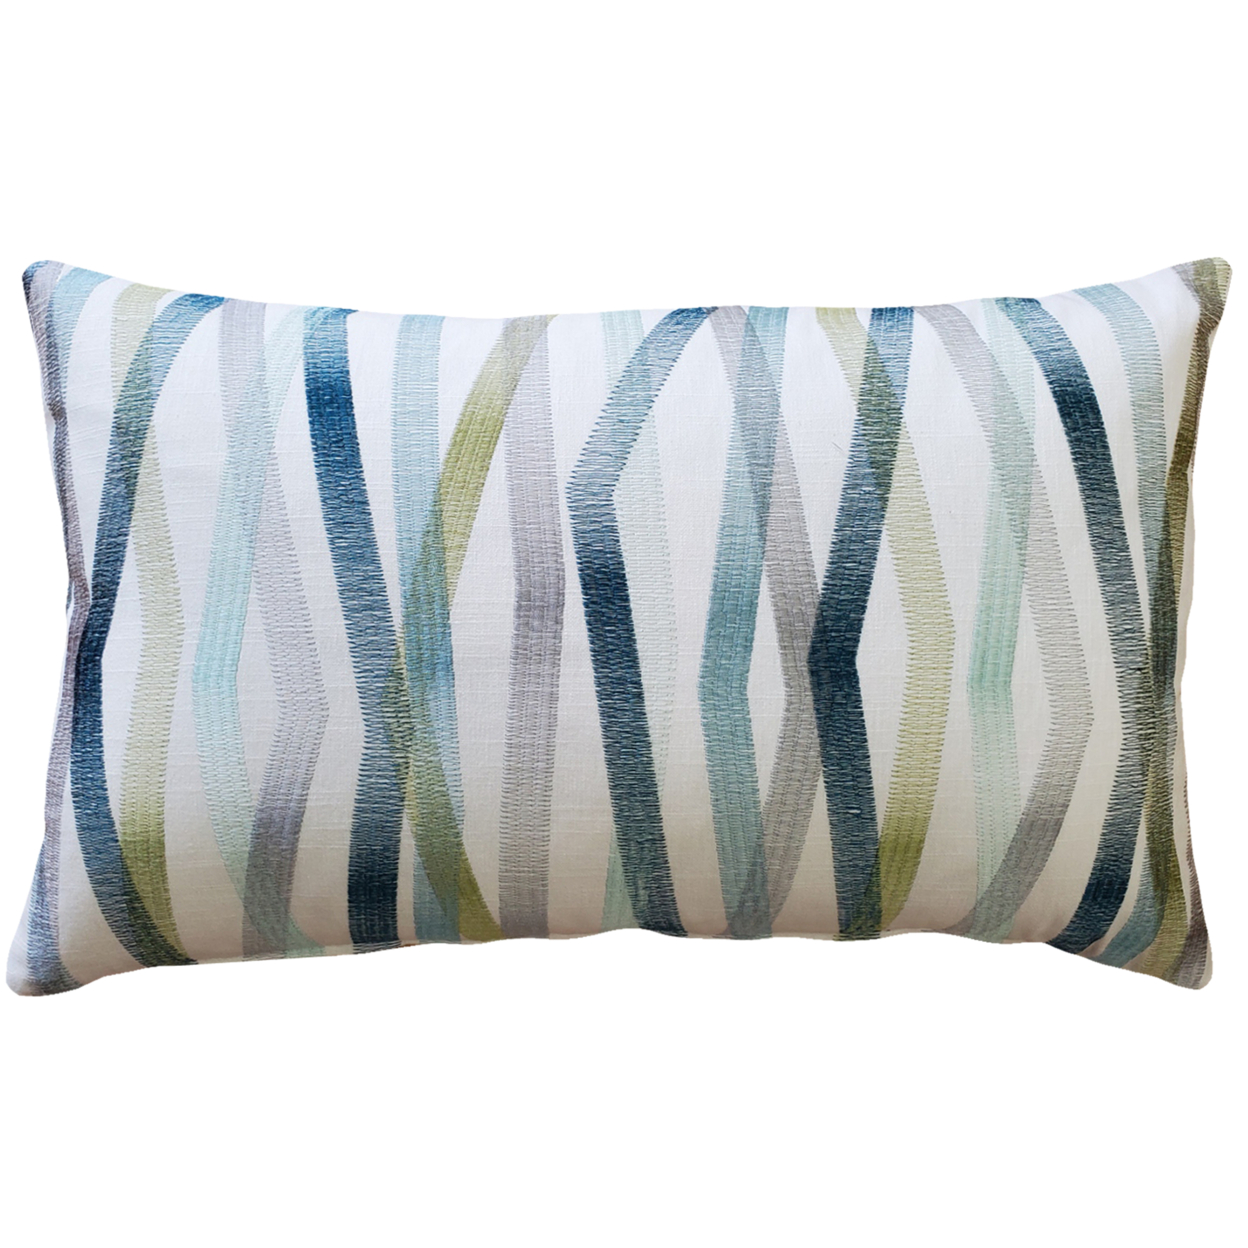 Wandering Lines Deep Sea Throw Pillow 14x24 Inches Square, Complete Pillow With Polyfill Pillow Insert